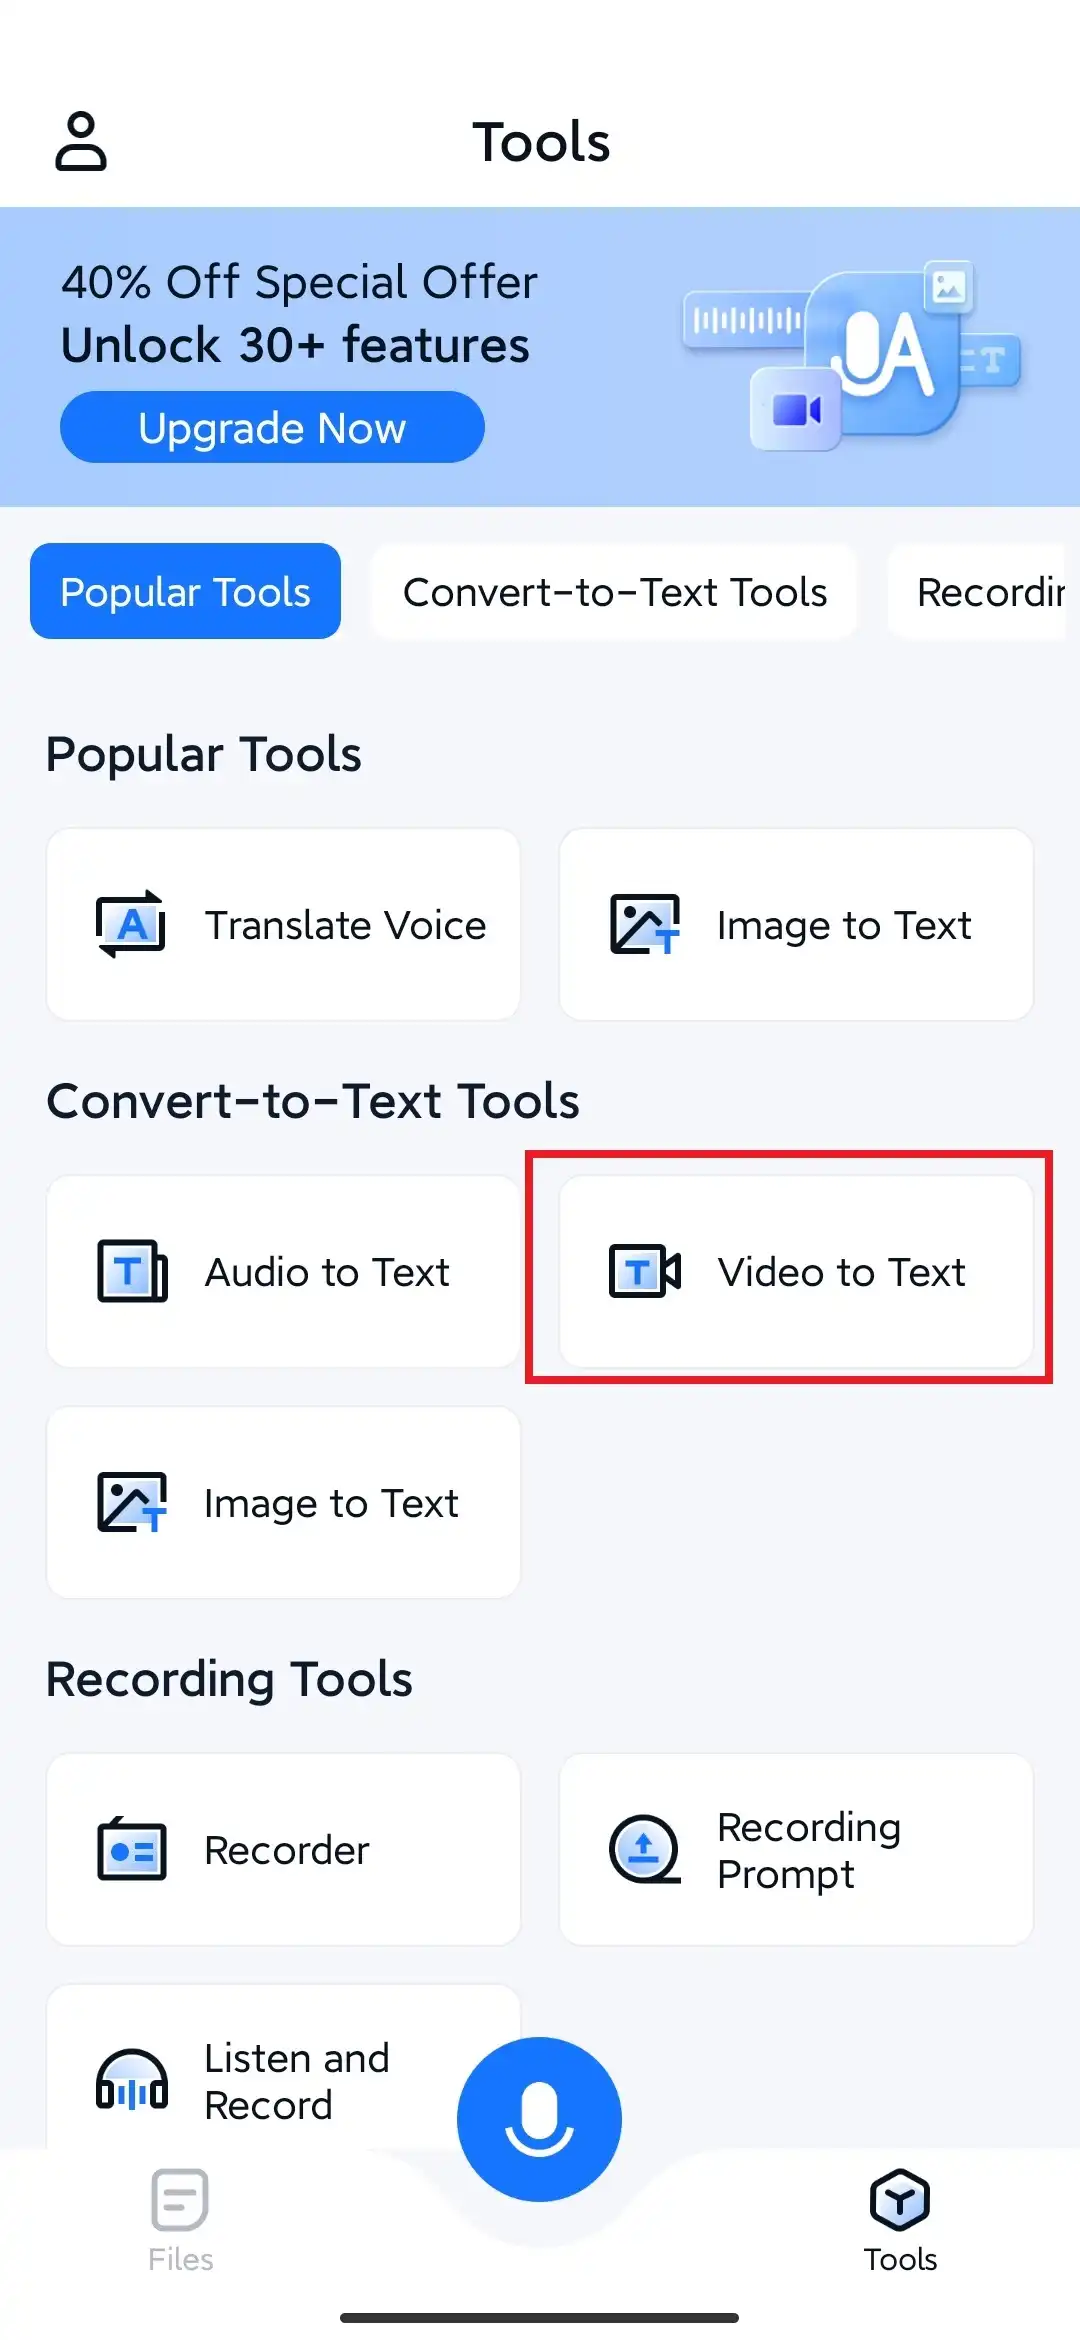 how to transcribe video to text